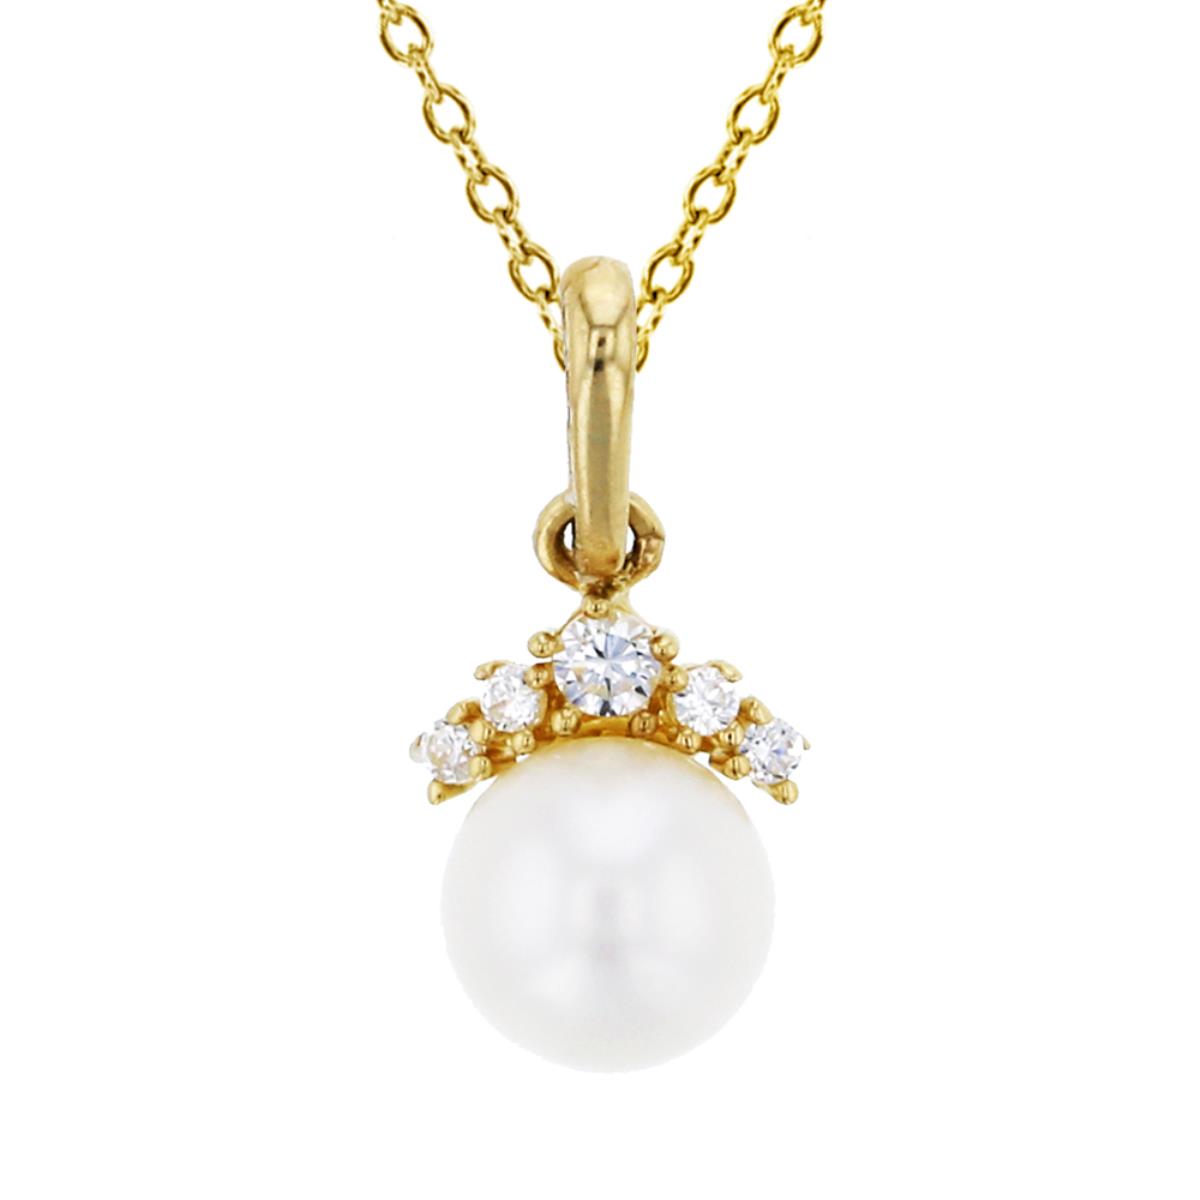 10K Yellow Gold 5mm Fresh Water Pearl & CZ Dangling 18" Necklace